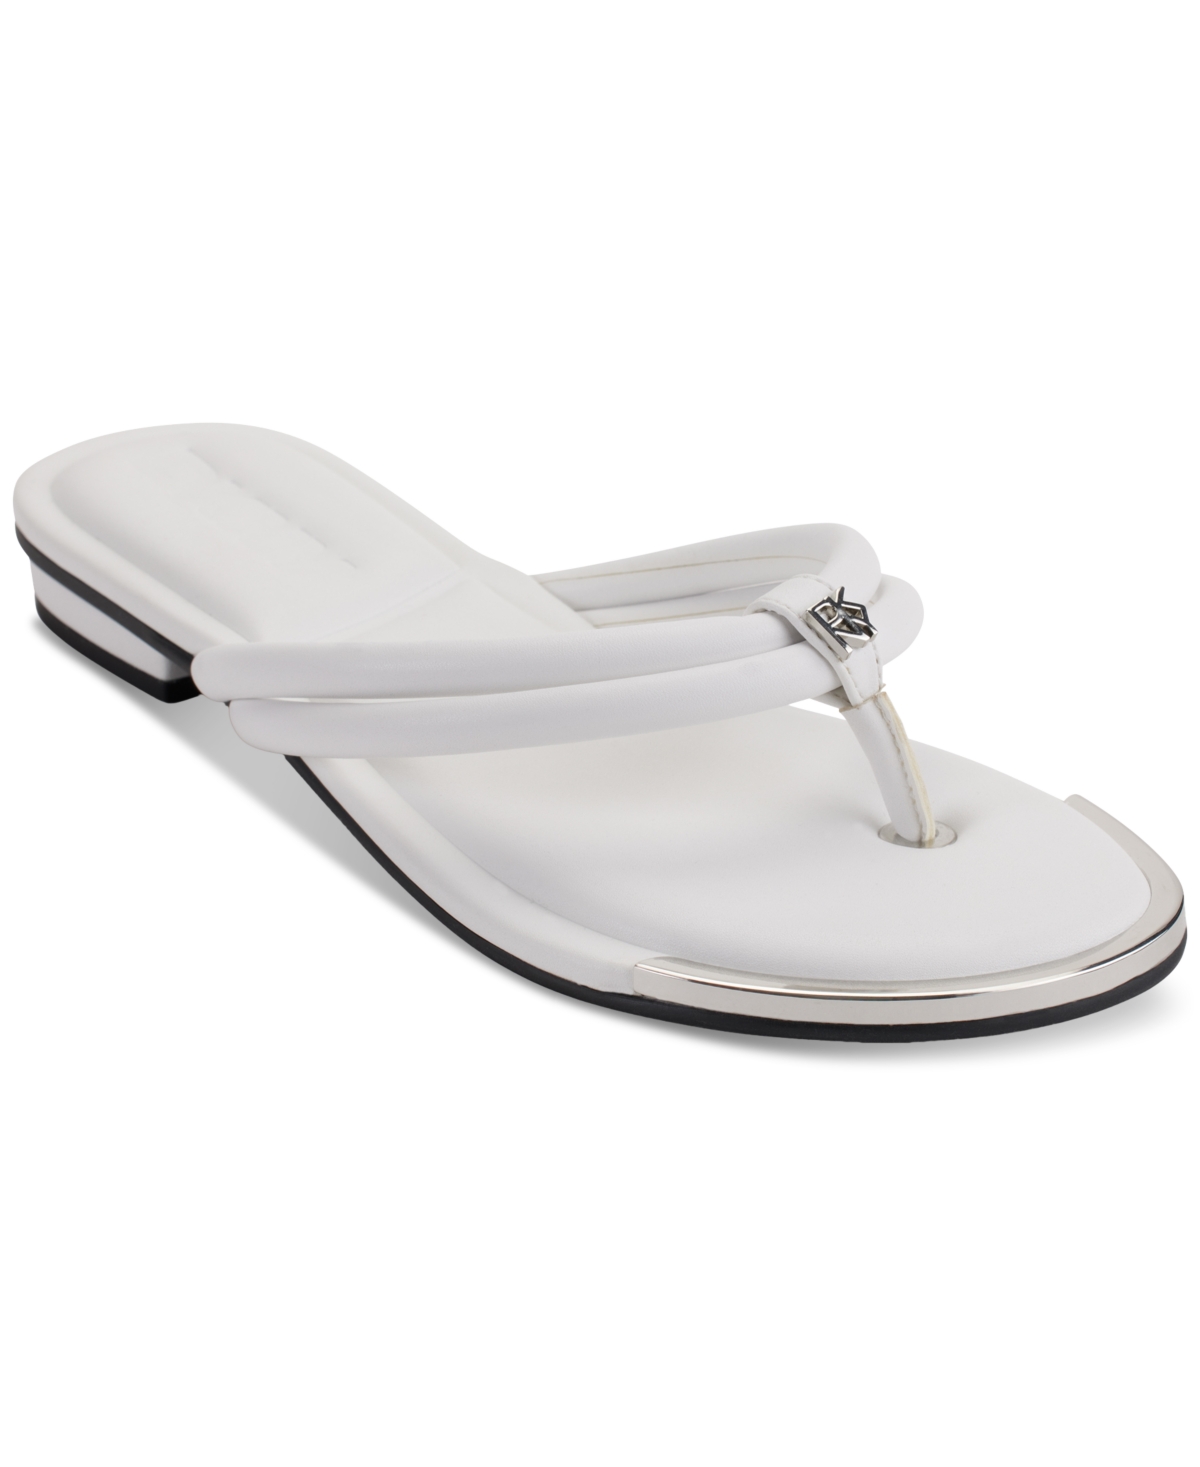 Dkny Clemmie Slip On Thong Flip Flop Sandals In Bright White